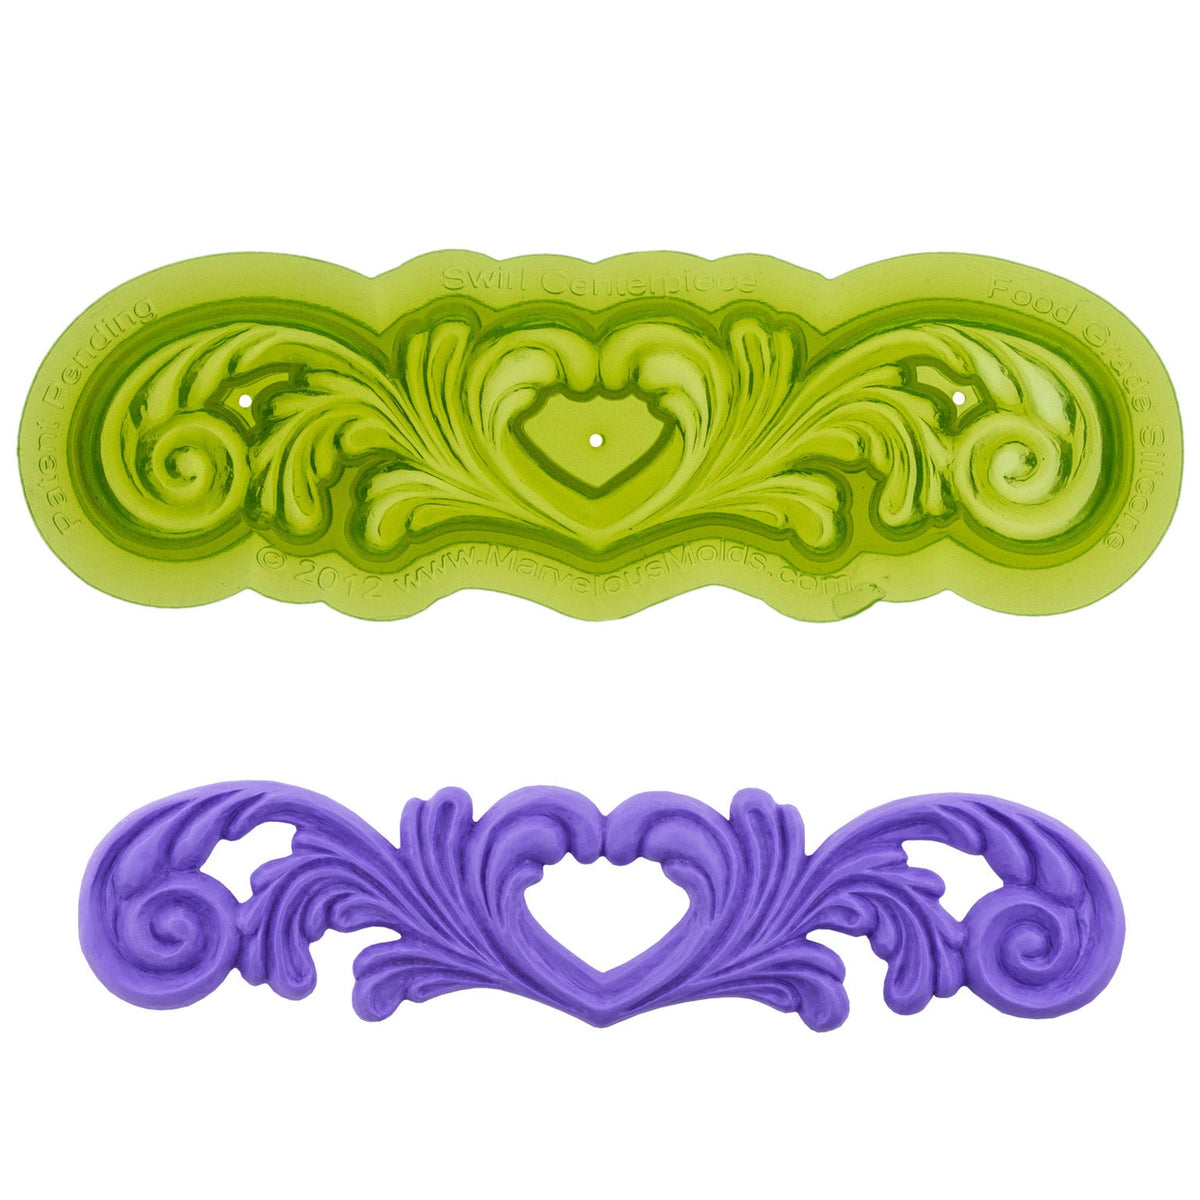 Swirl Centerpiece Scroll Food Safe Silicone Mold for Fondant Cake Decorating by Marvelous Molds